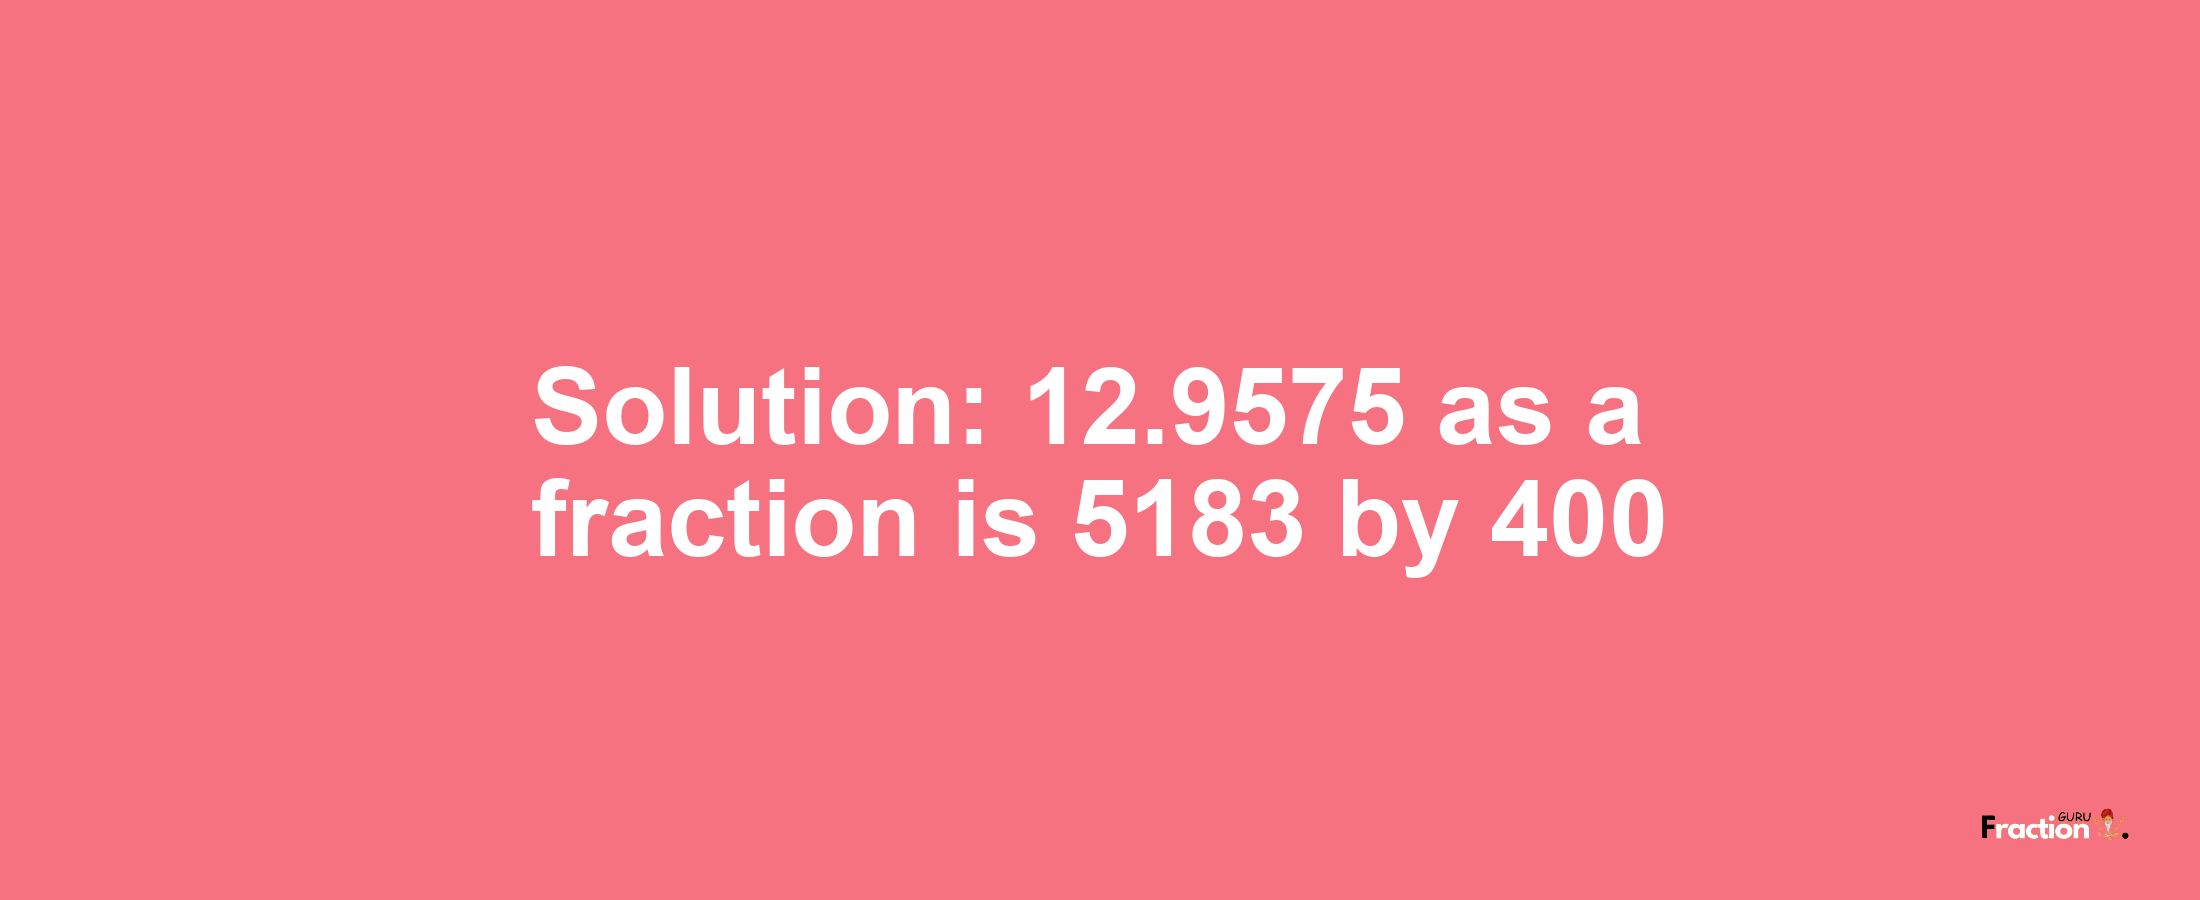 Solution:12.9575 as a fraction is 5183/400